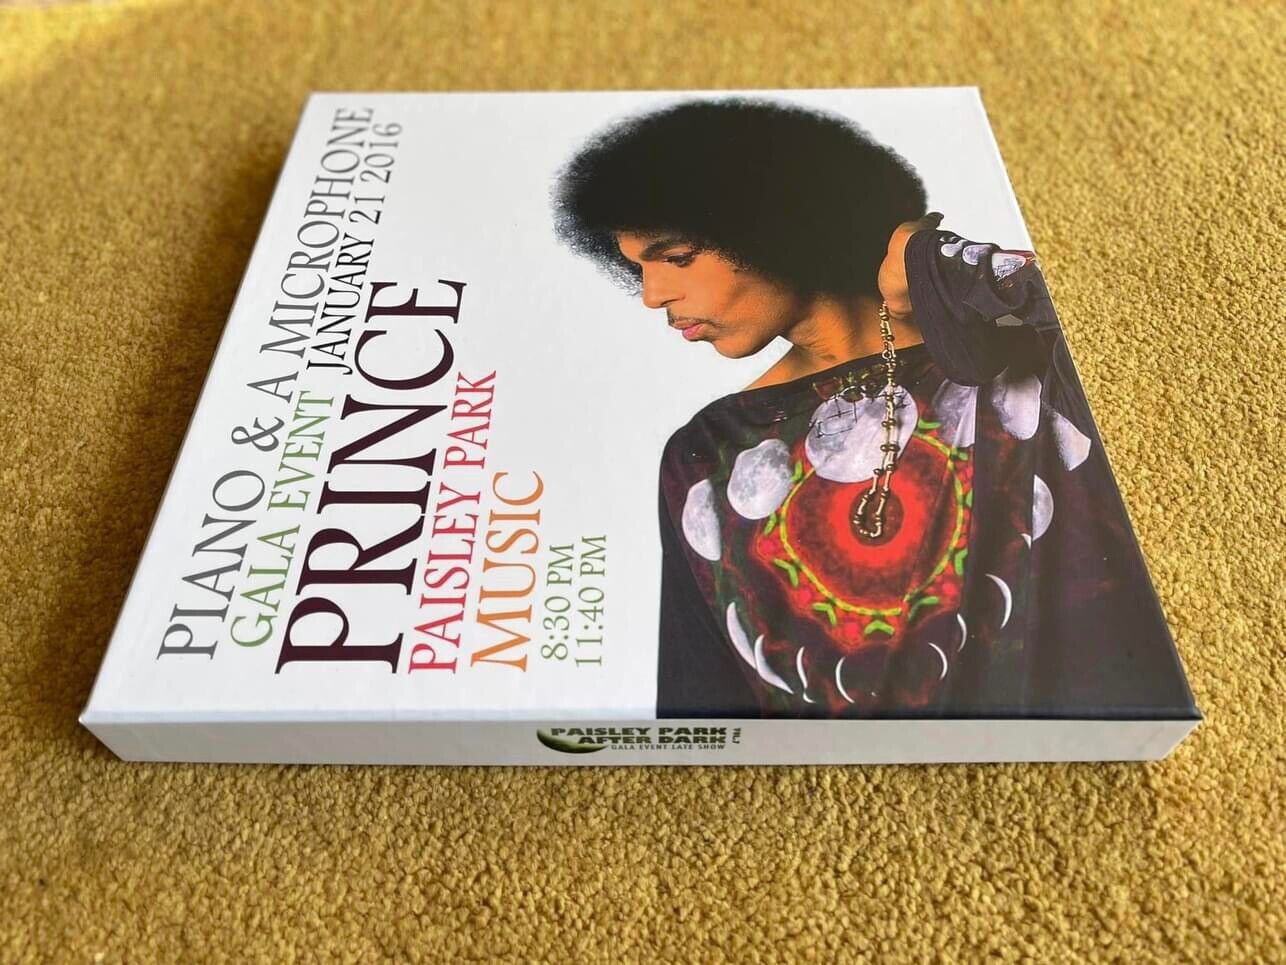 Prince Piano and Microphone Gala Event Paisley Park 2016 4 Vinyl Box RARE OOP